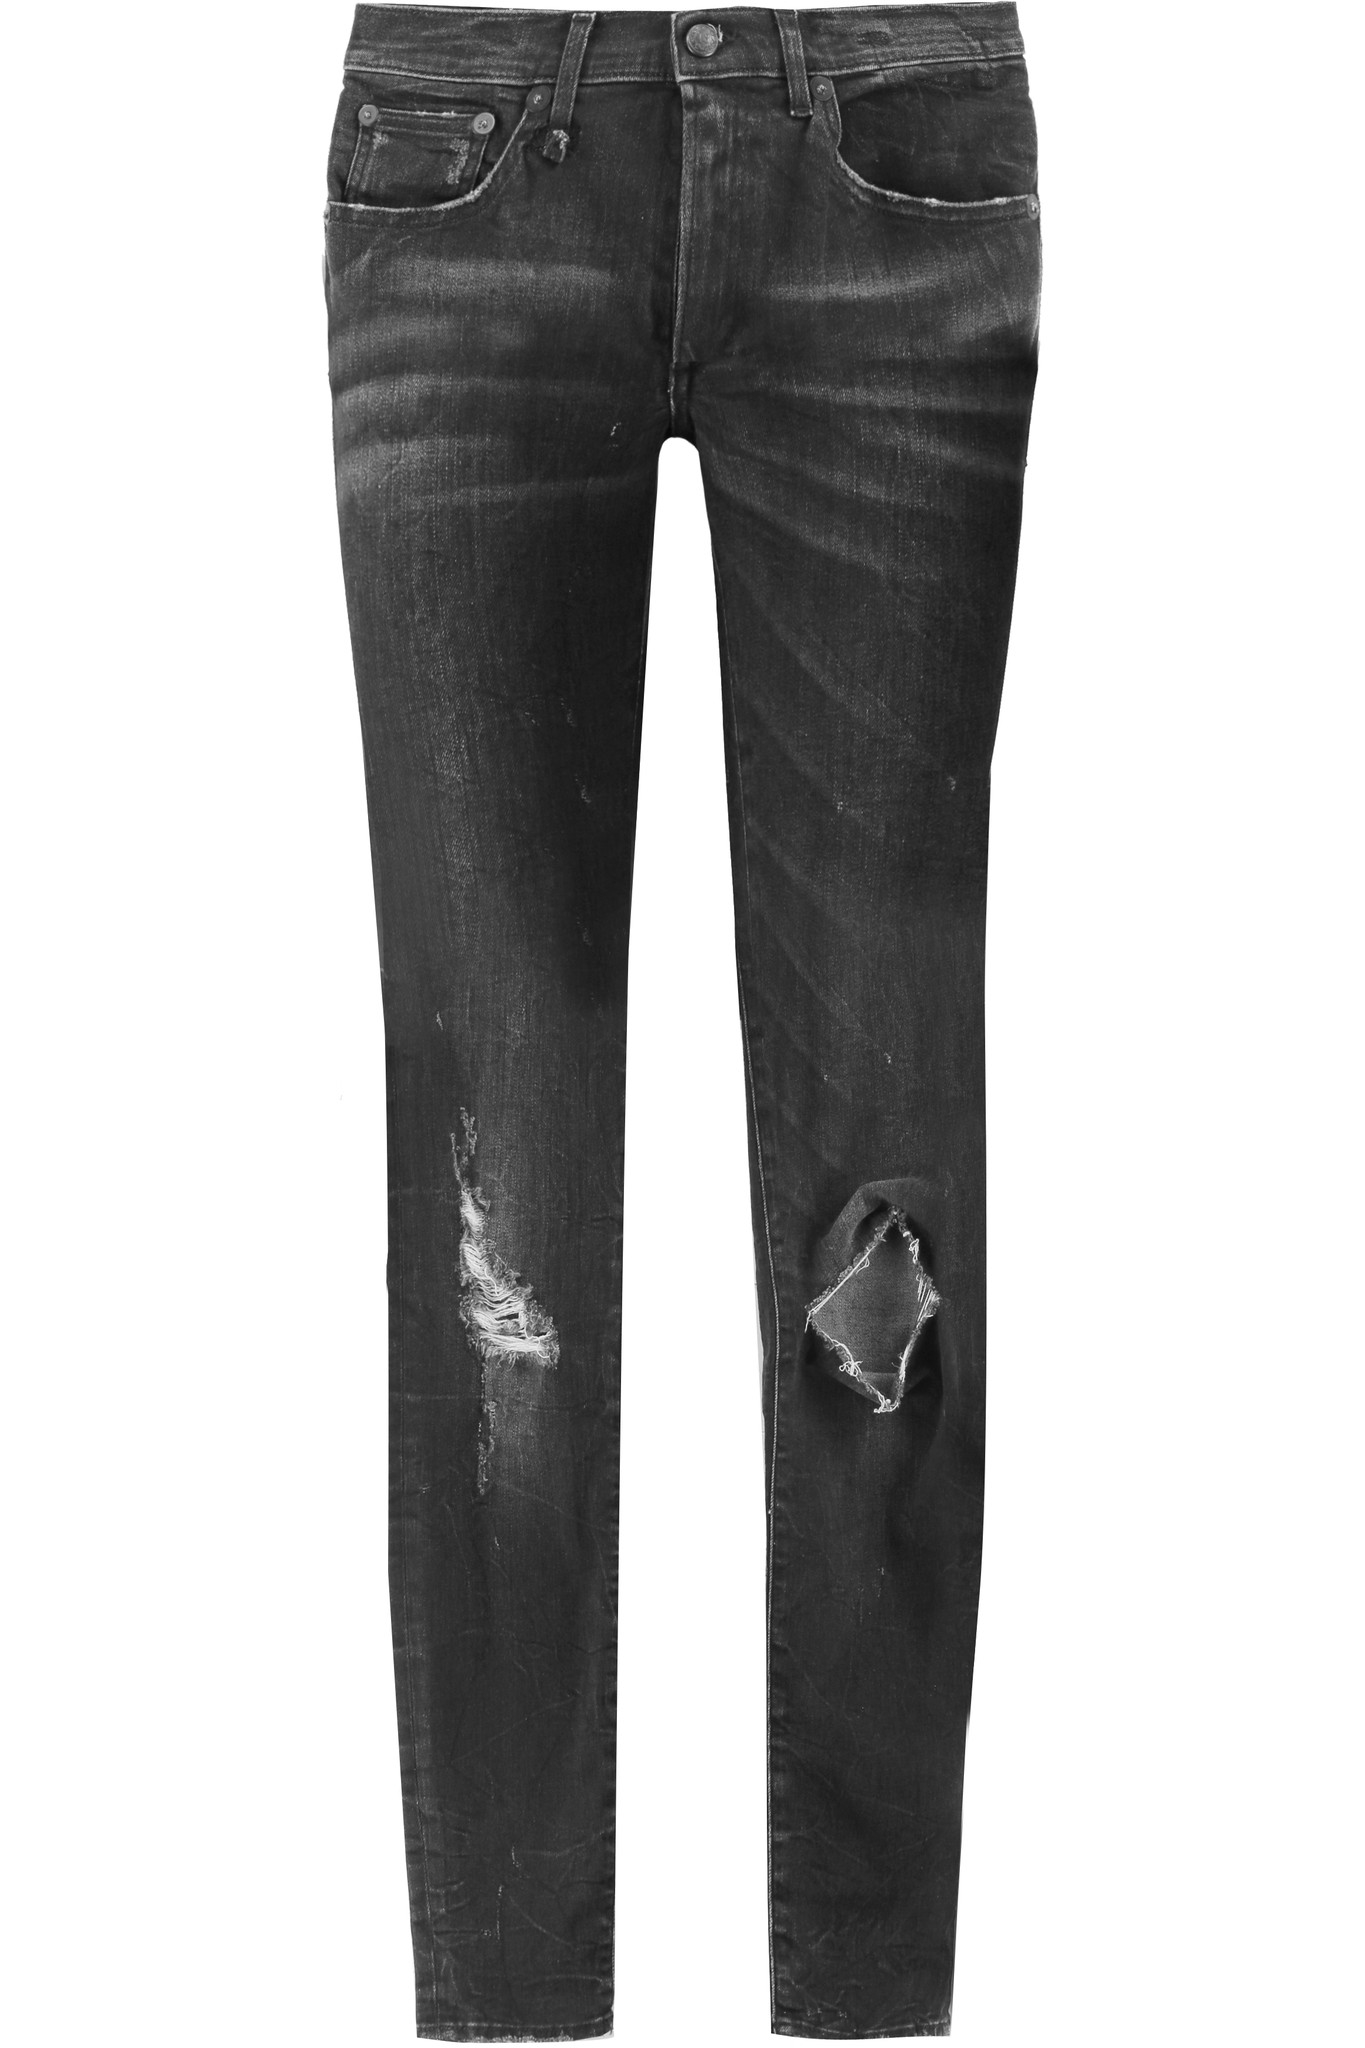 R13 Mid-rise Distressed Skinny Jeans in Black | Lyst